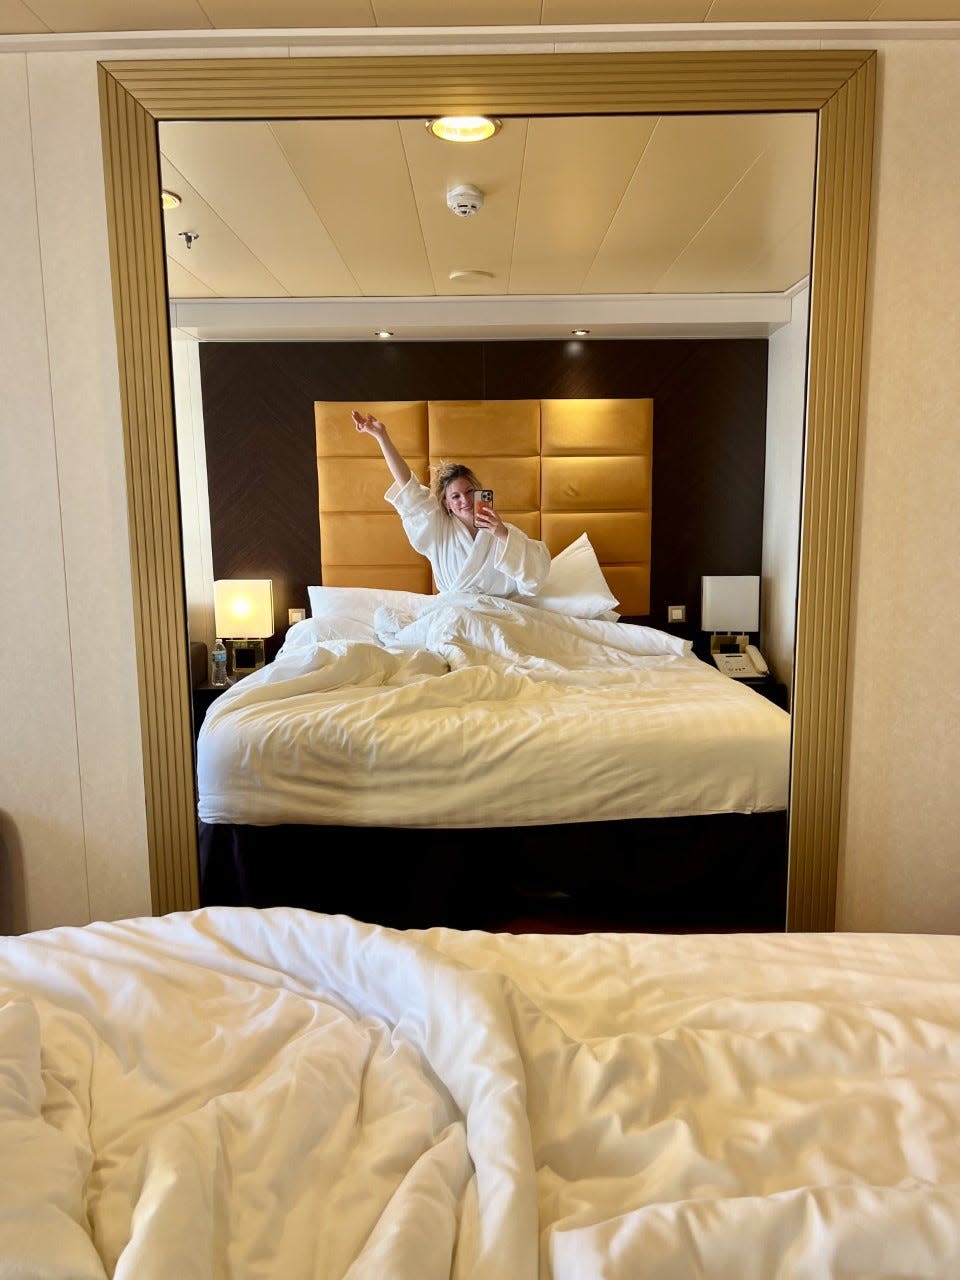 USA TODAY reporter Morgan Hines in her stateroom on MSC Divina in May.